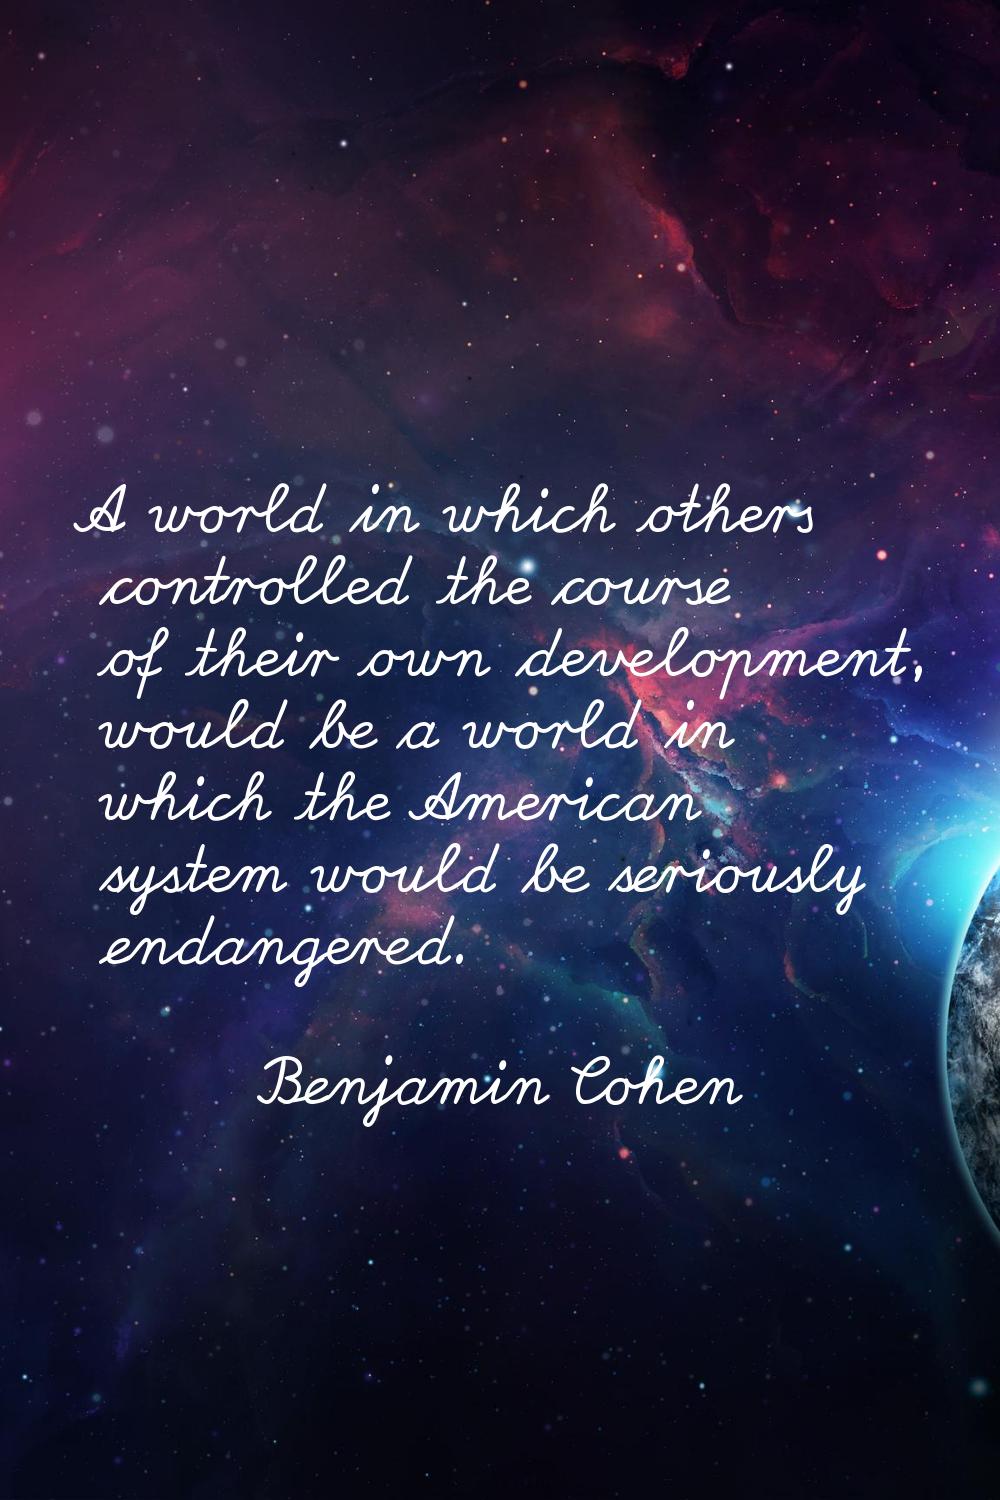 A world in which others controlled the course of their own development, would be a world in which t